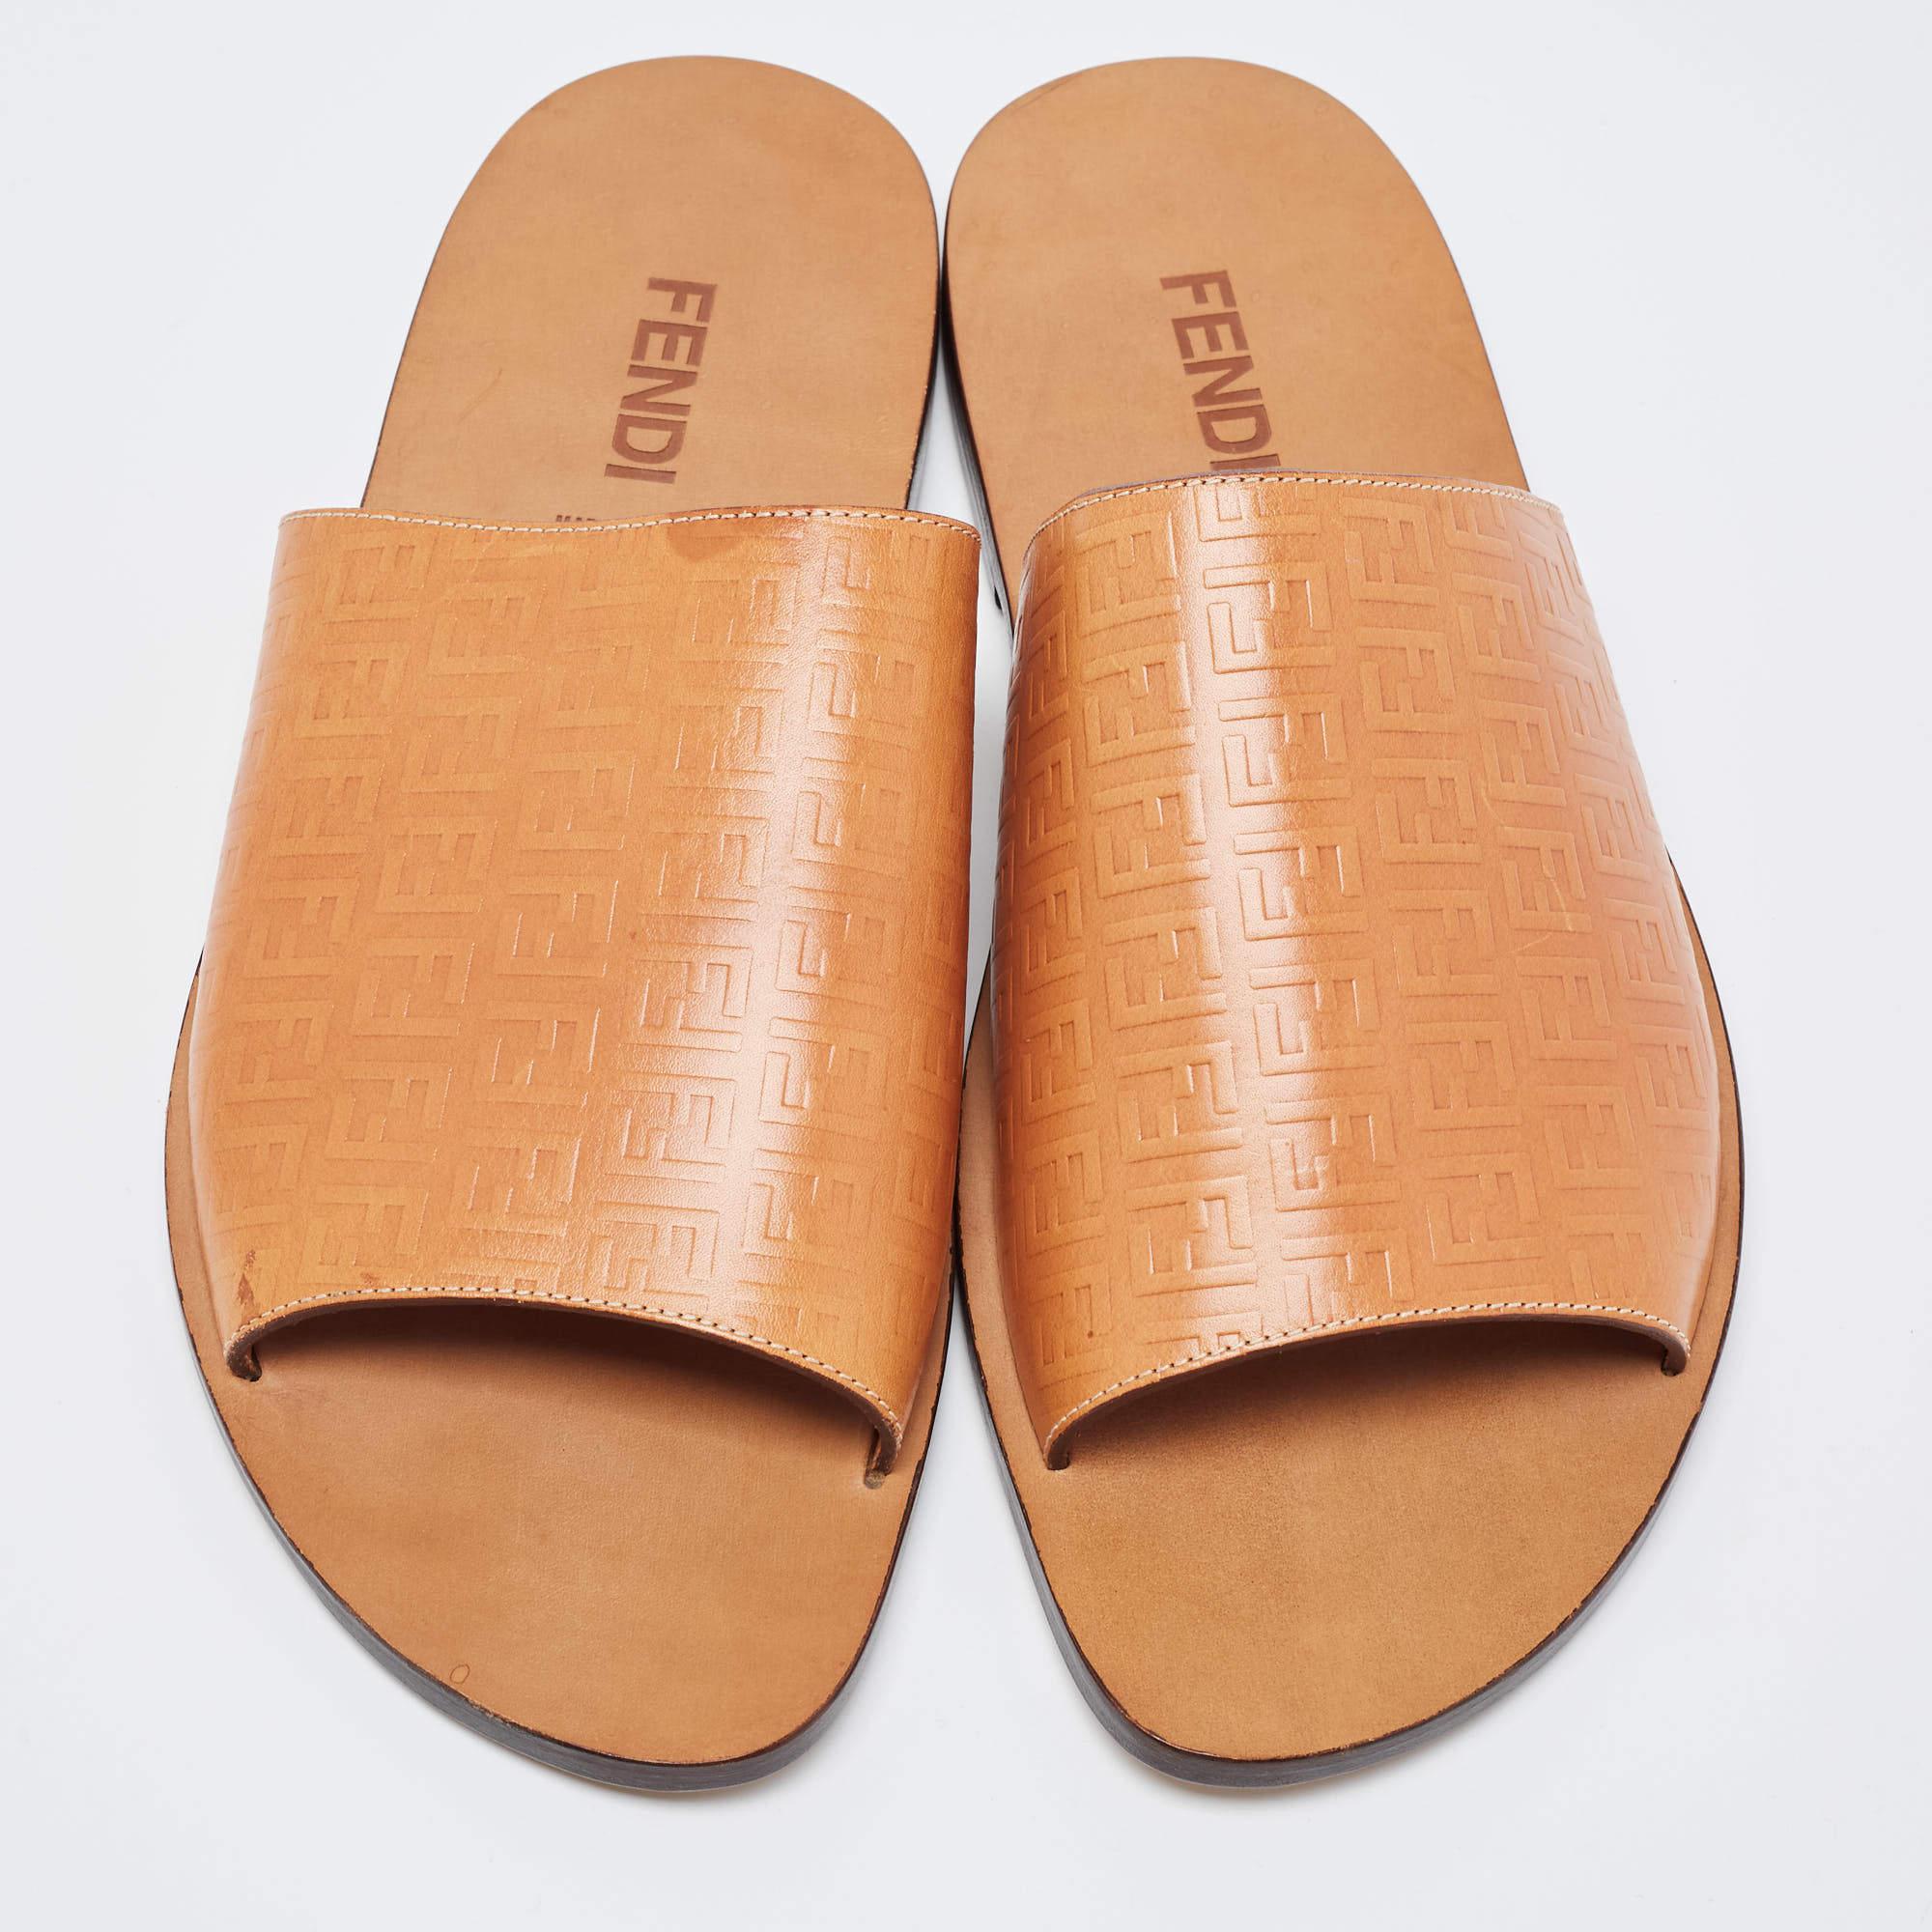 The Fendi slides are luxurious footwear featuring Fendi's iconic Zucca logo pattern embossed on premium tan leather. These comfortable slides offer a stylish and sophisticated design with a branded strap, making them a chic choice for both casual